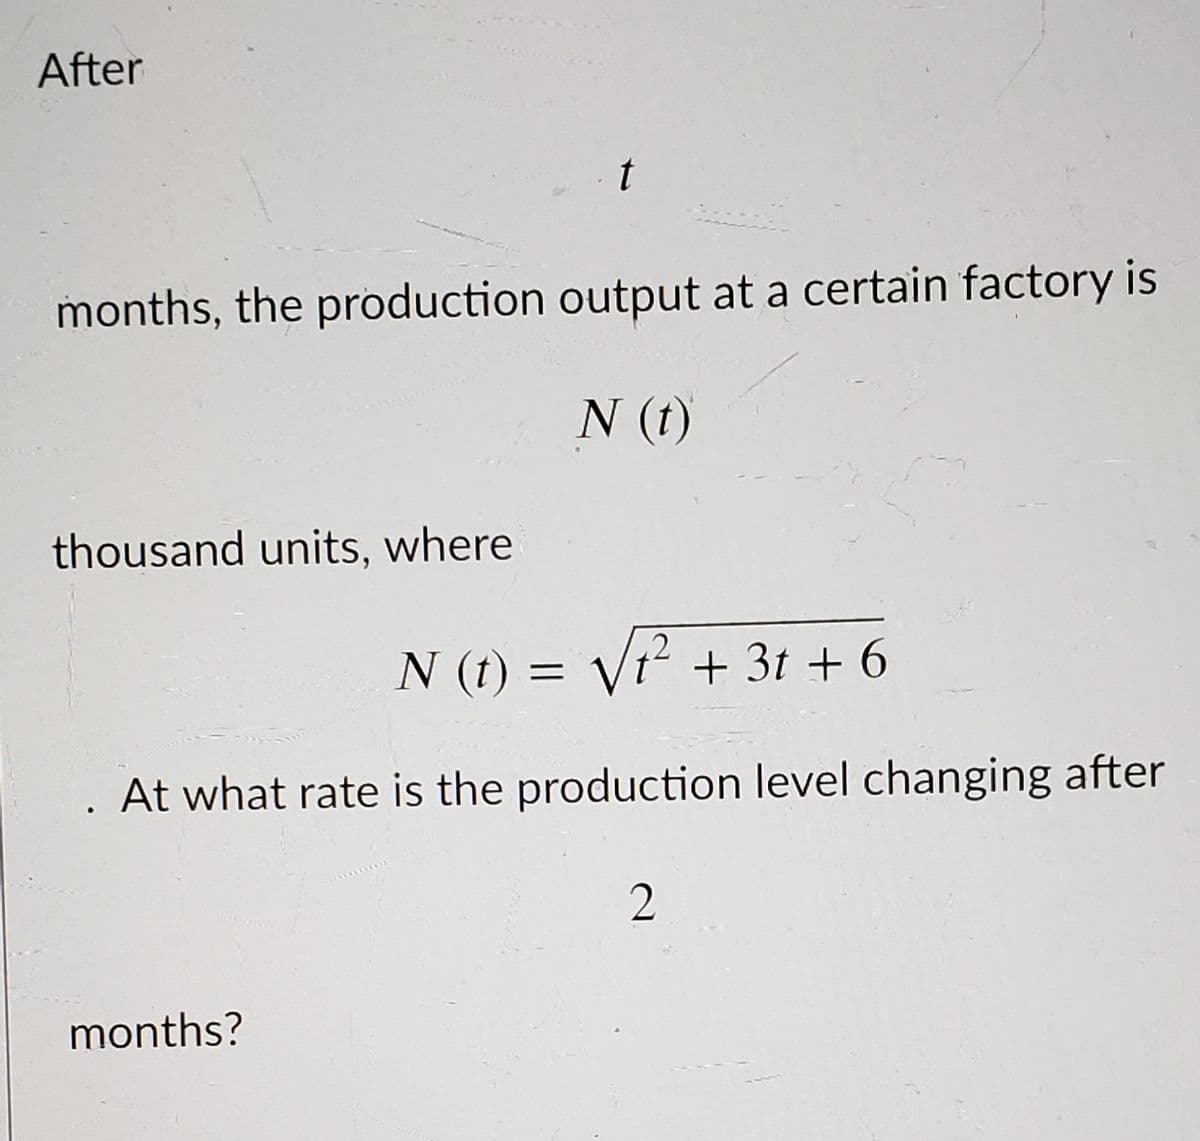 After
t
months, the production output at a certain factory is
N (t)
thousand units, where
N (t) = Vr² + 3t + 6
At what rate is the production level changing after
months?
